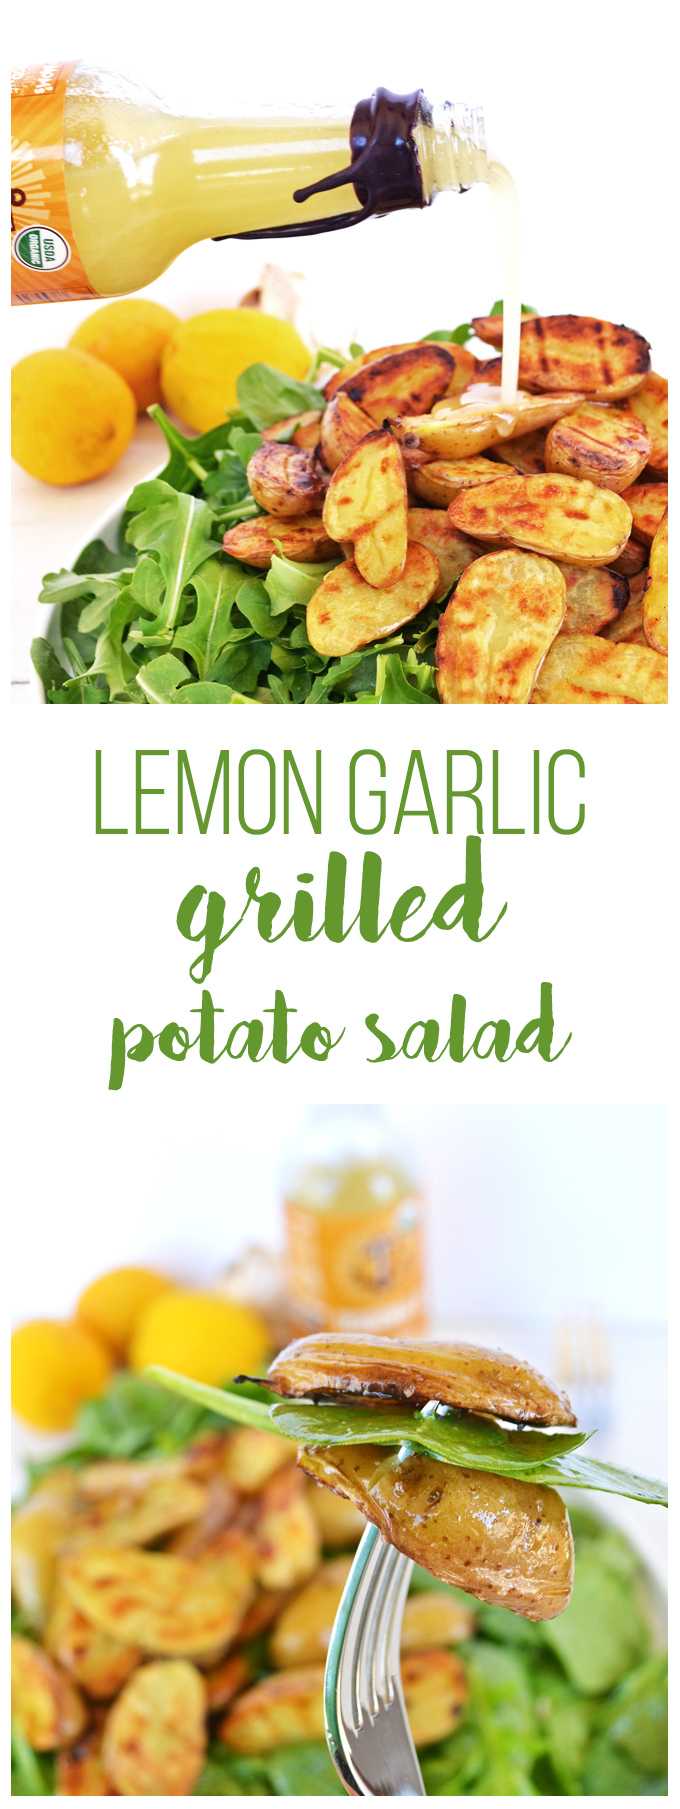 Tessamae's Lemon Garlic Vinaigrette uses all clean and Whole 30 approved ingredients and goes perfectly on this Grilled Potato Salad! It is a perfect light side dish for any spring or summer barbecue!